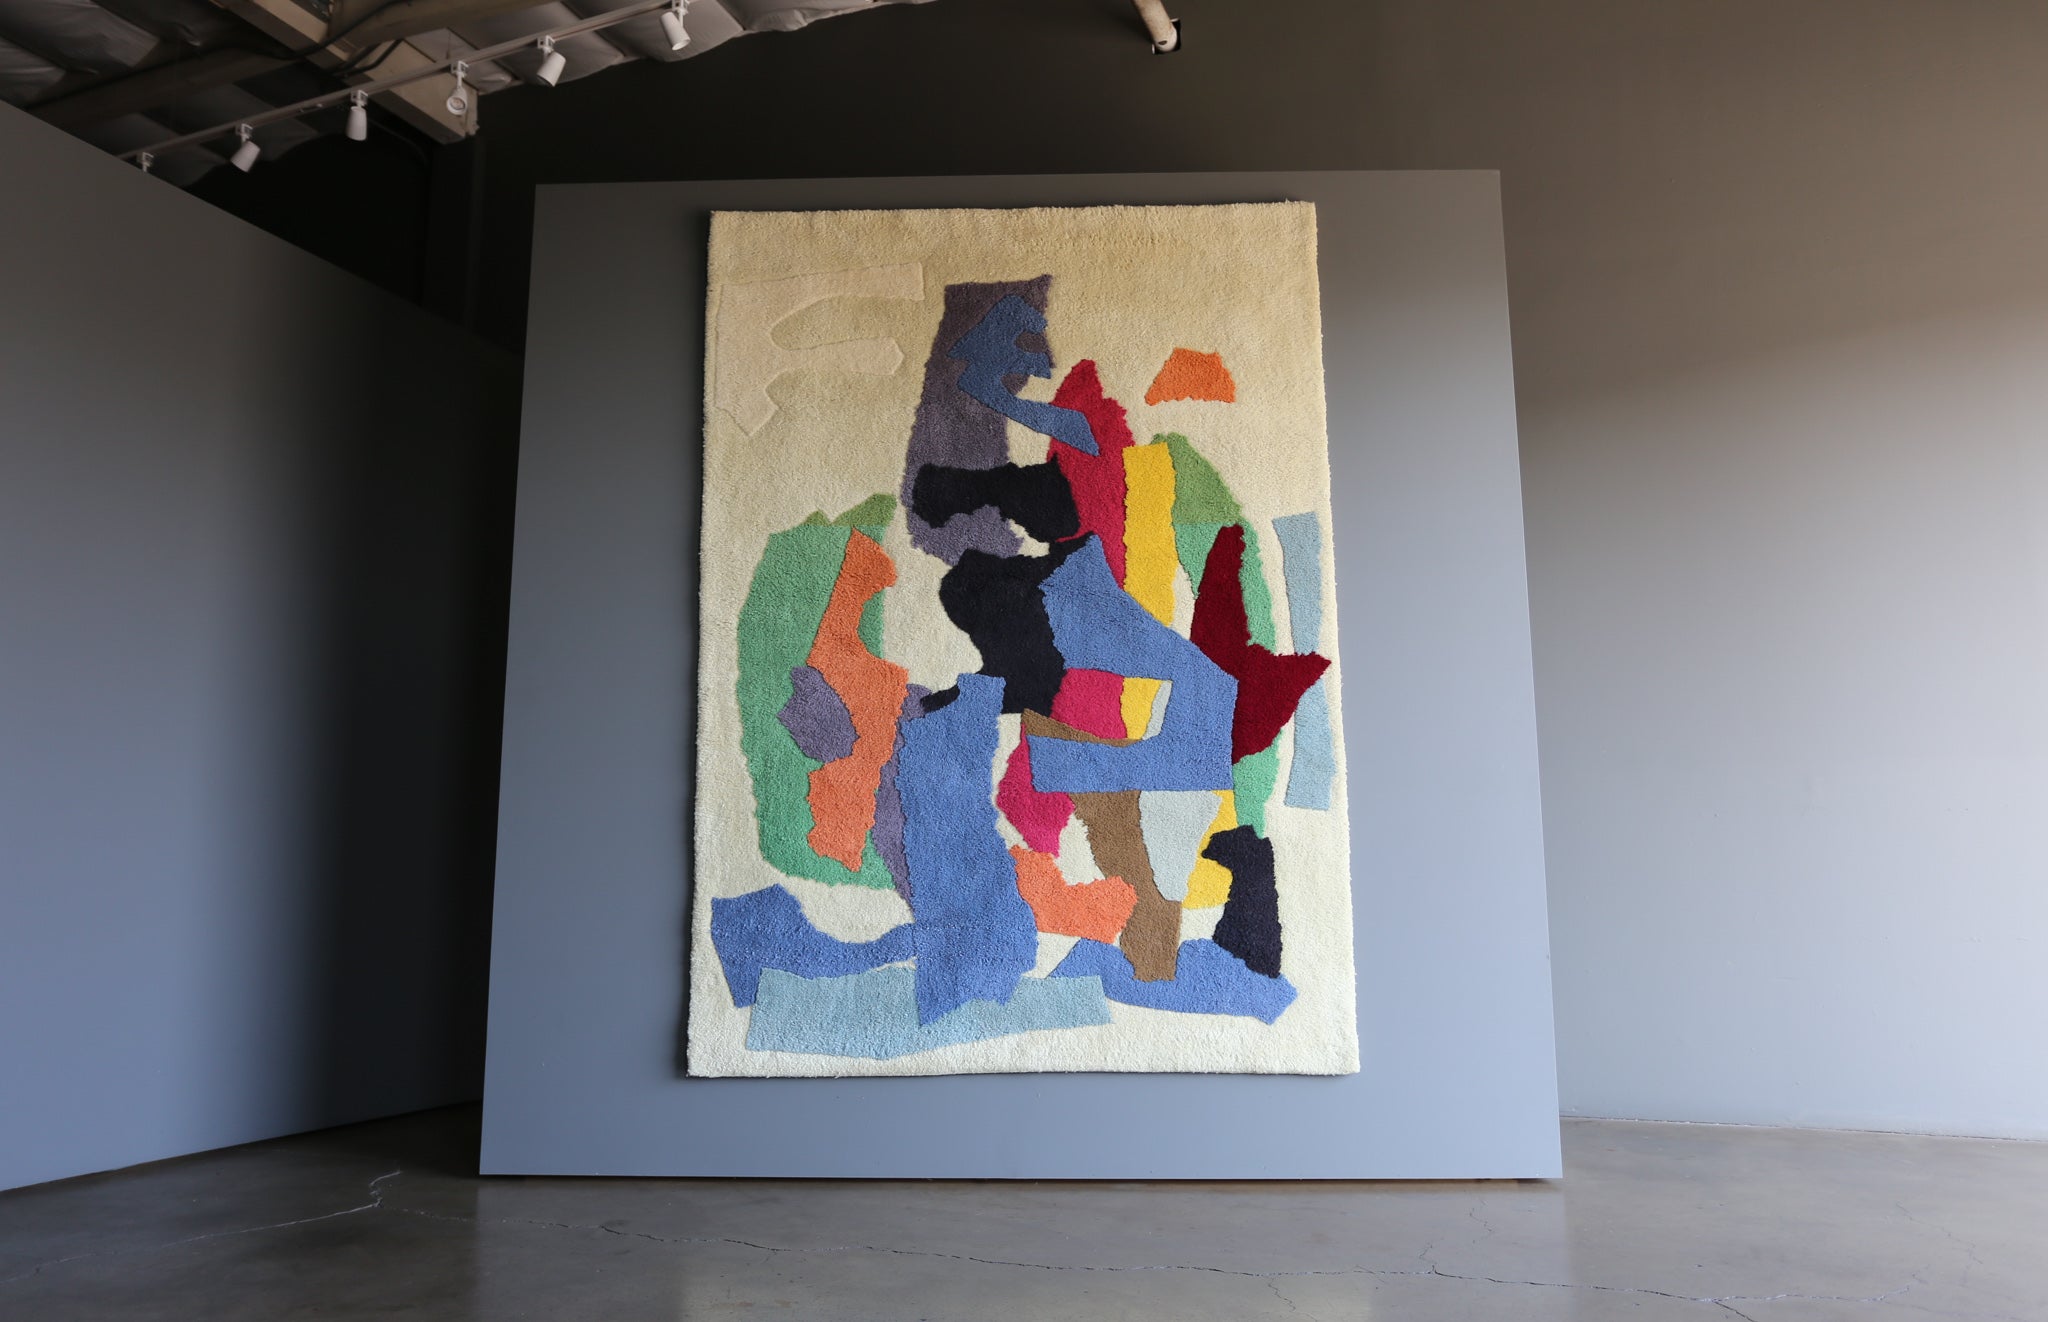 = SOLD = Robert Goodnough "Collage Tapestry" for Modern Master Tapestries, 1978